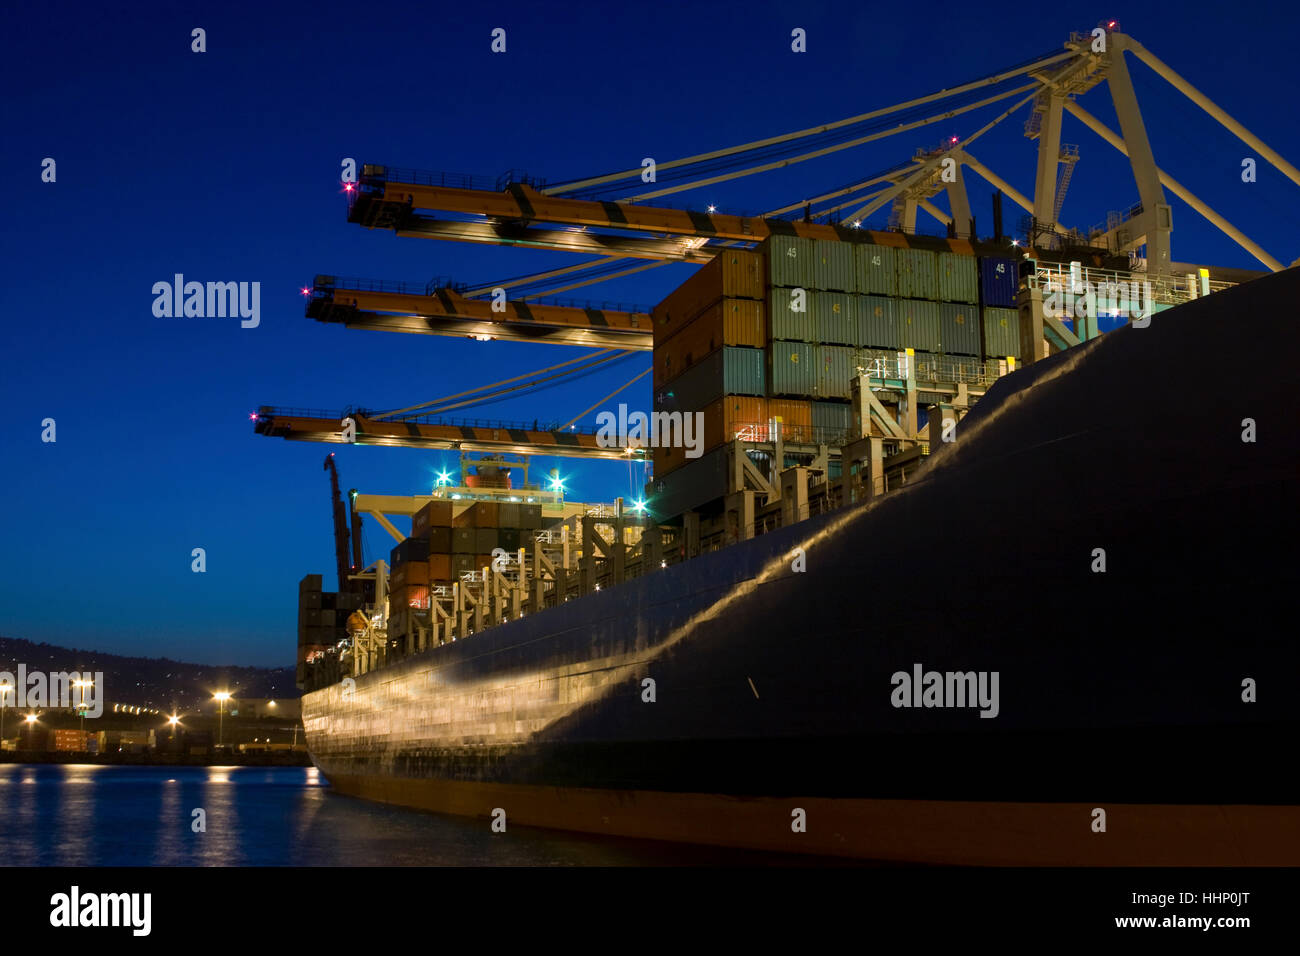 Cargo containers on freighter in port at night Stock Photo